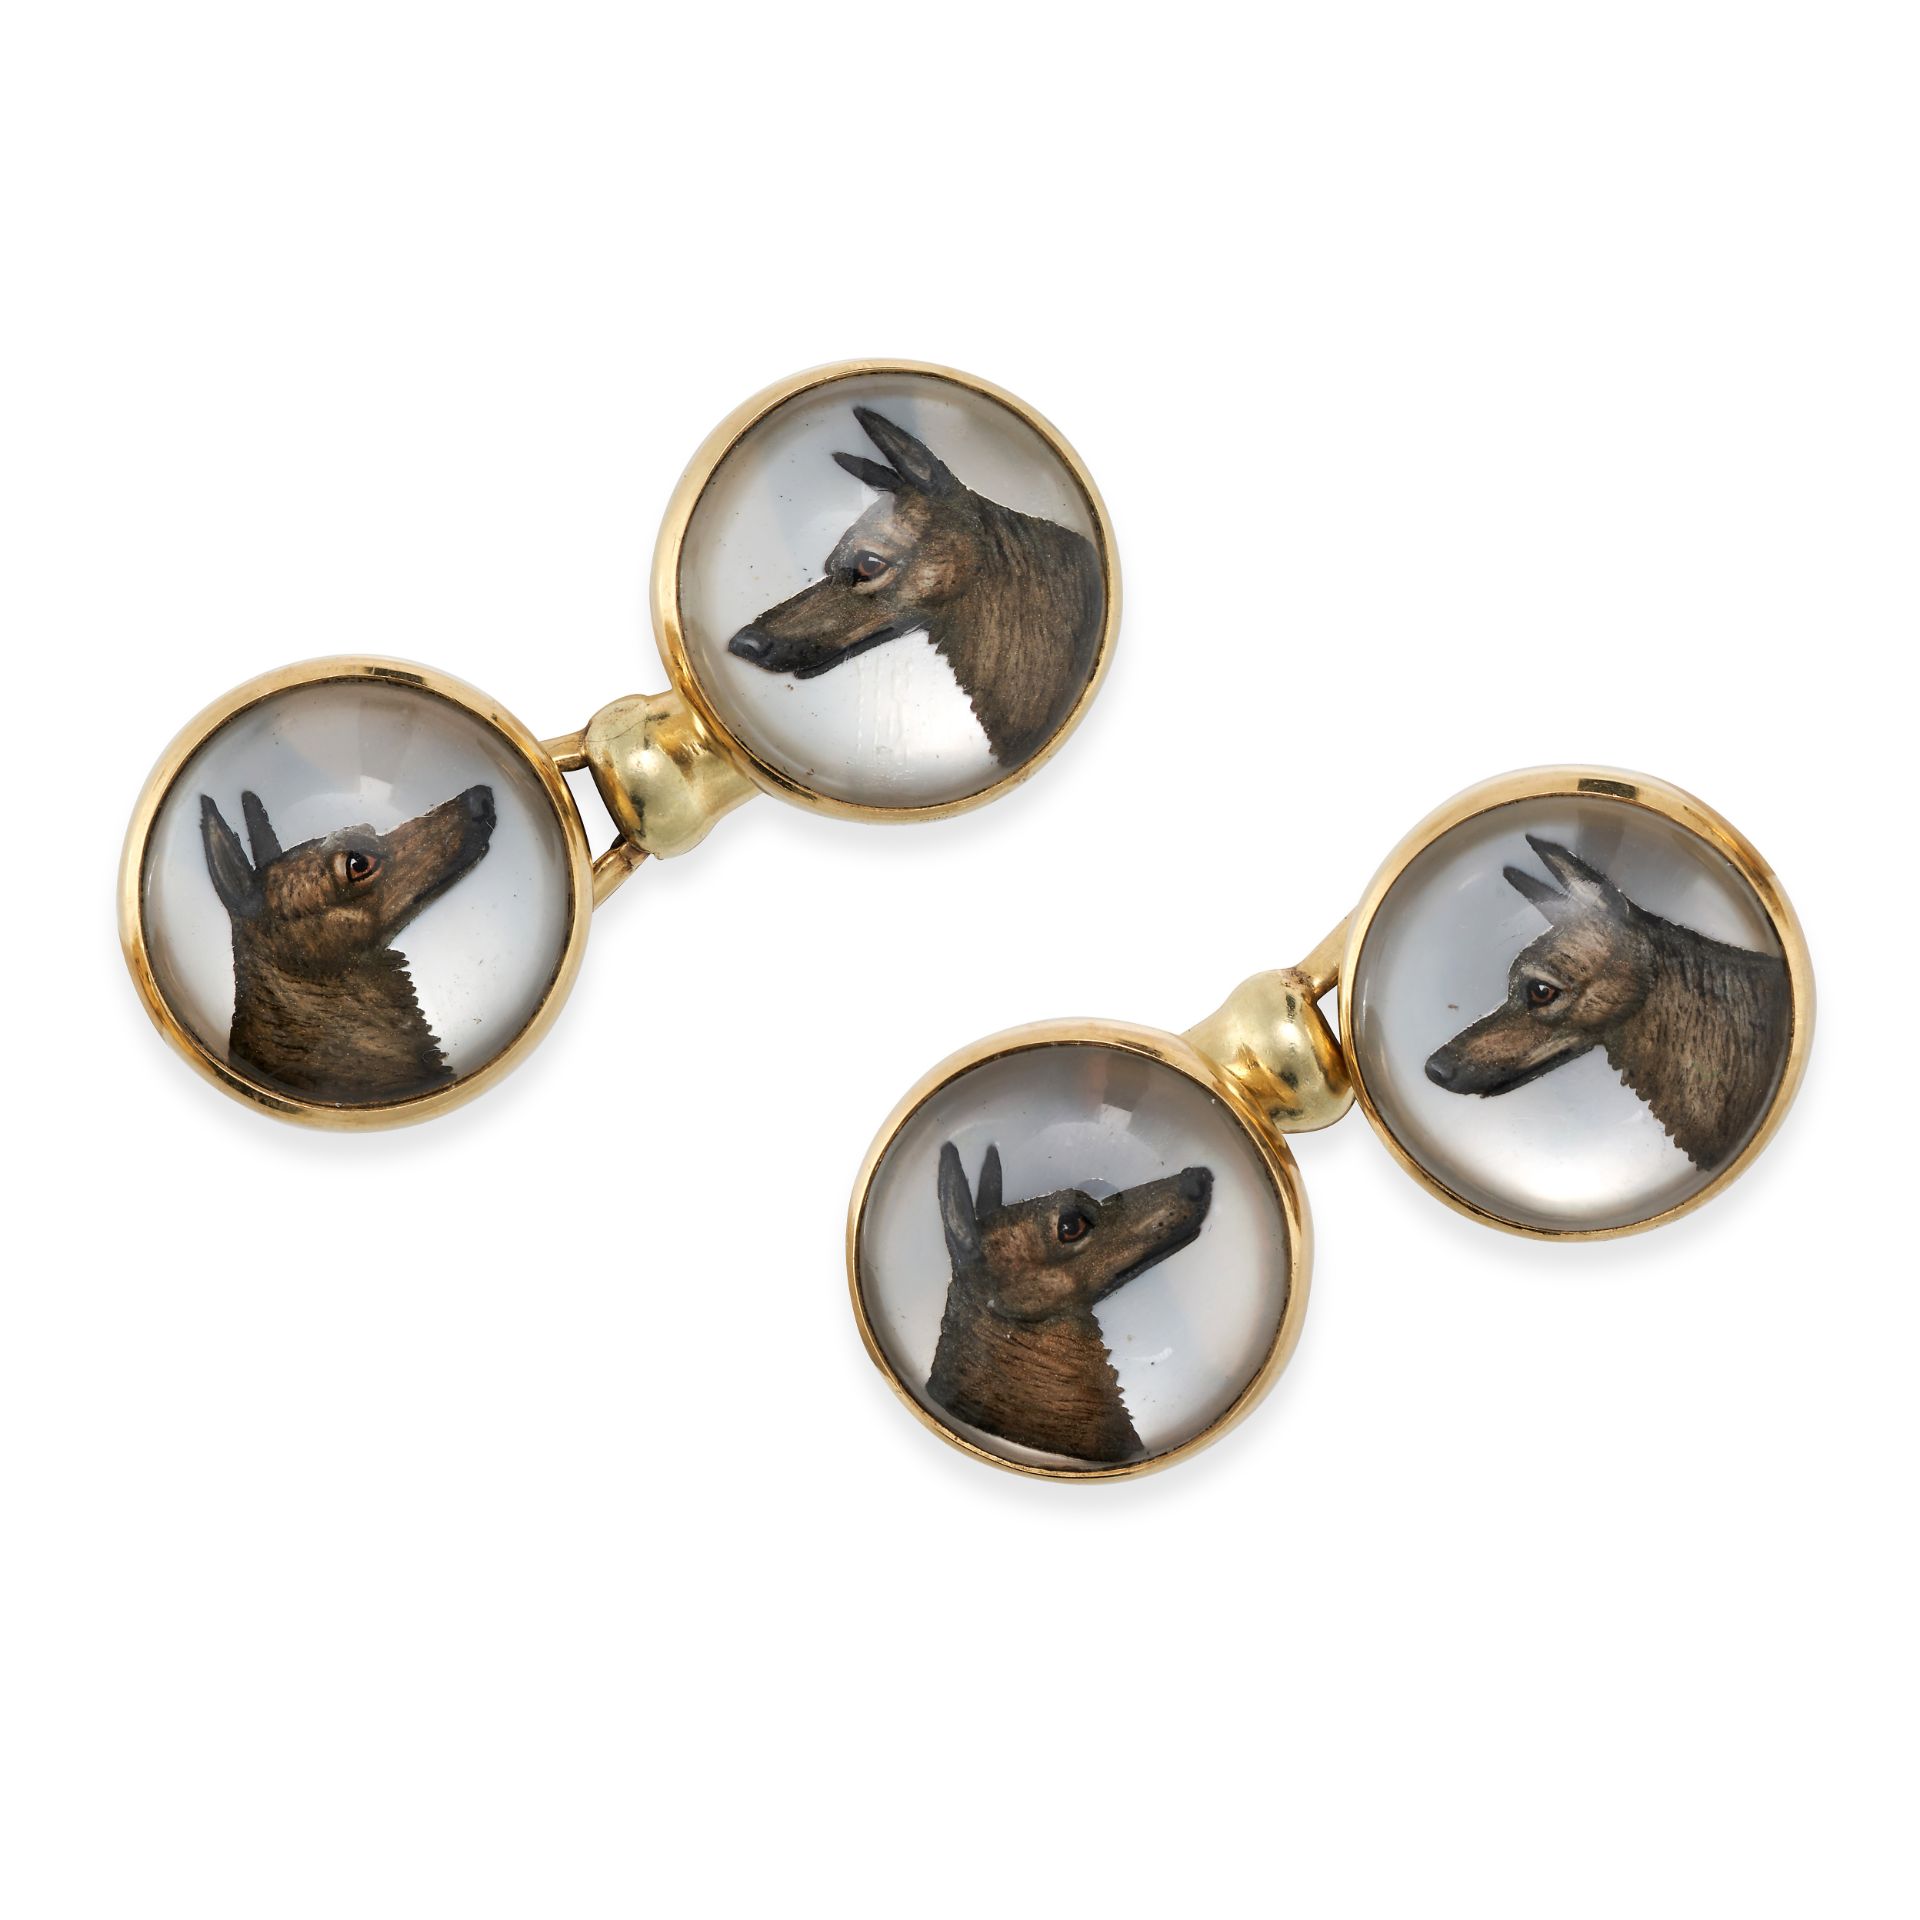 A PAIR OF ESSEX CRYSTAL DOG CUFFLINKS in 14ct yellow gold, the round faces set with an Essex crys...